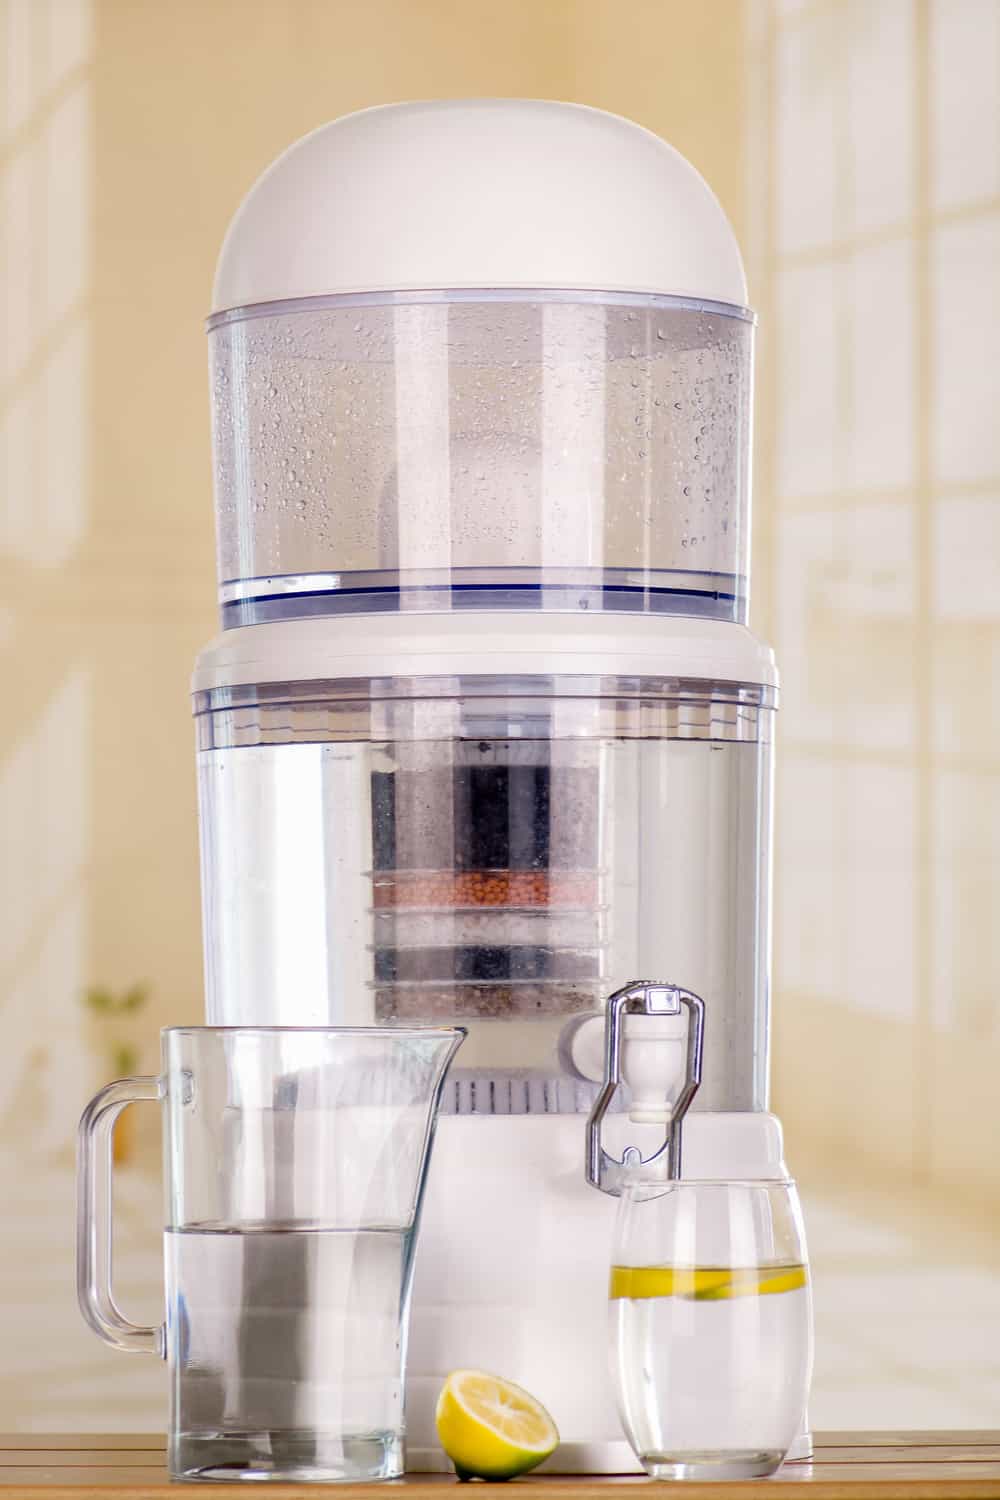 16 Homemade Water Purifier Plans You Can DIY Easily